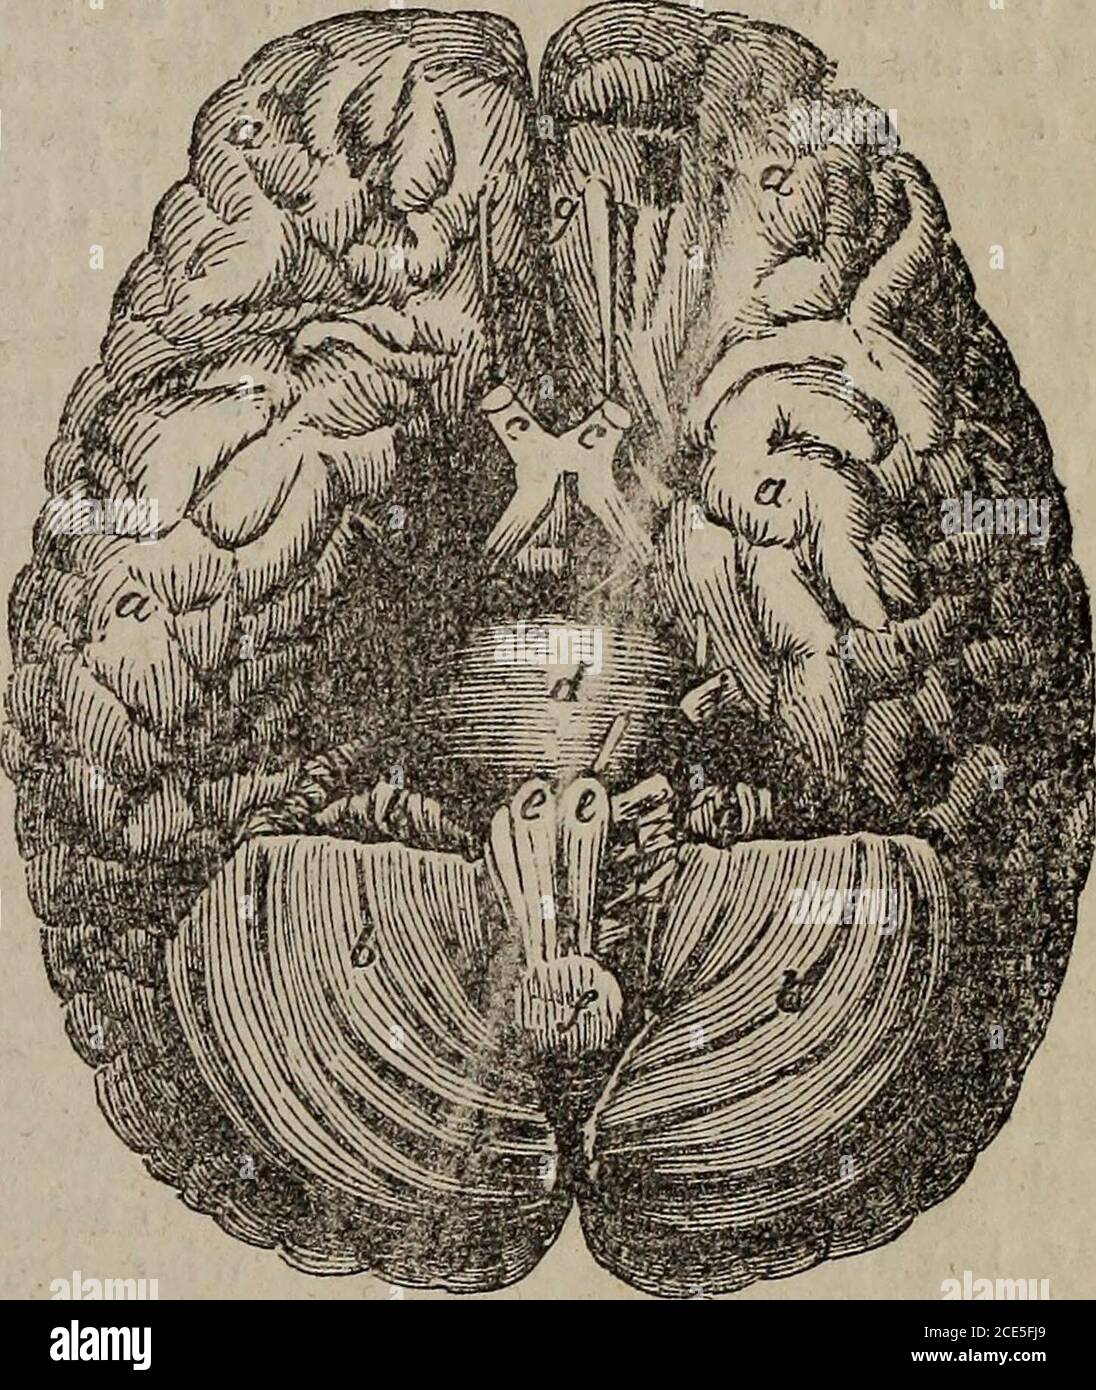 . The people's medical journal, and home doctor : a monthly journal, devoted to the dissemmination of popular information on anatomy, physiology, the laws of health, and the cure of disease . a is the deep cleft or fissure which divides a a are convolutions,—b b are the two halves the brain into two halves,—-b b are the con- of the cerebellum, or little brain,—c c are the volutions of the brain. t Optic Nerves—e e part of the Medulla Oblongata, g the Olfactory Nerve. Stock Photo